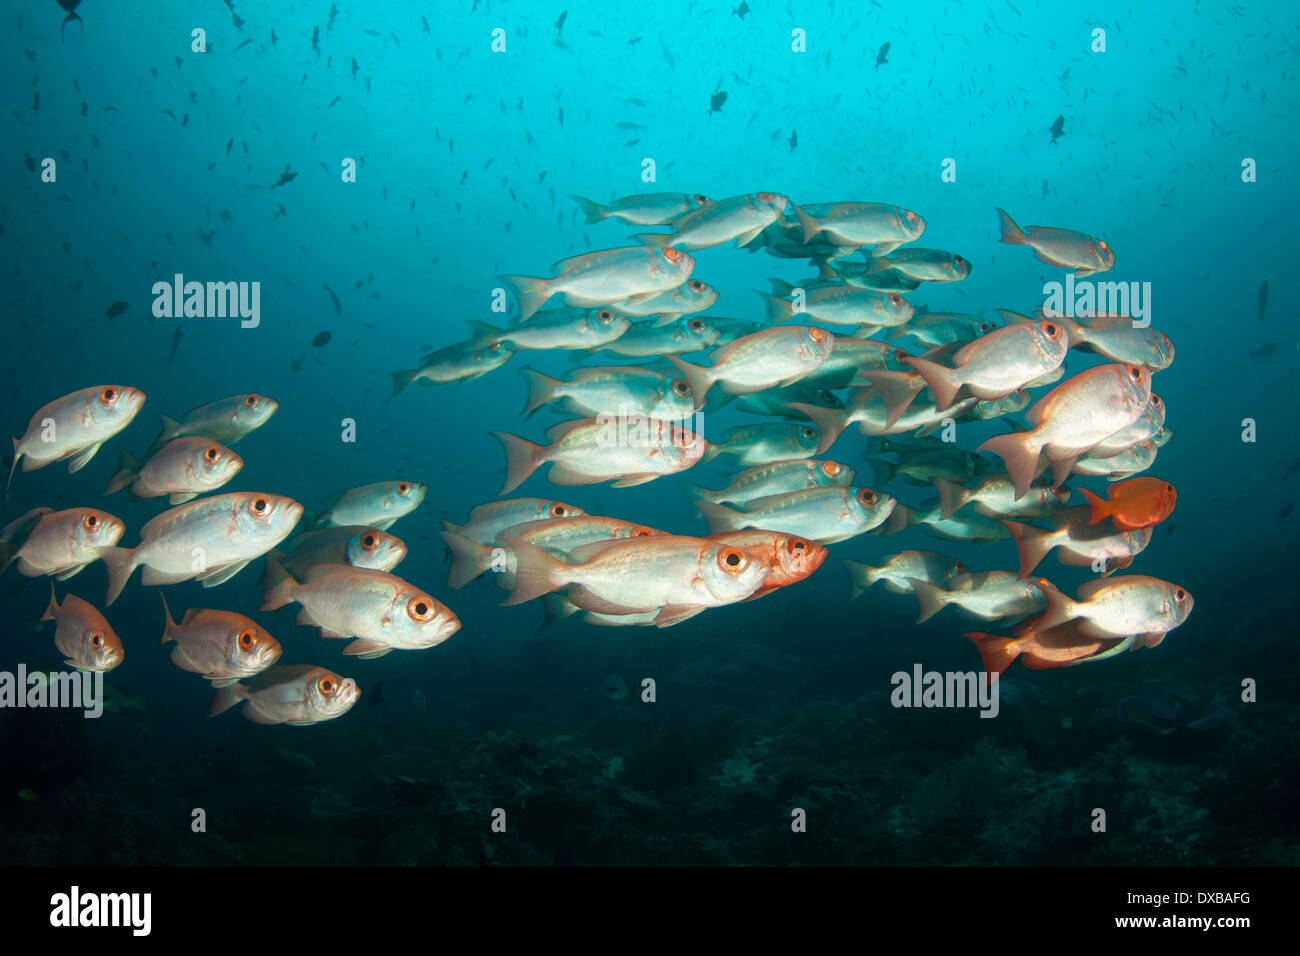 Tropical fish over coral reef Stock Photo